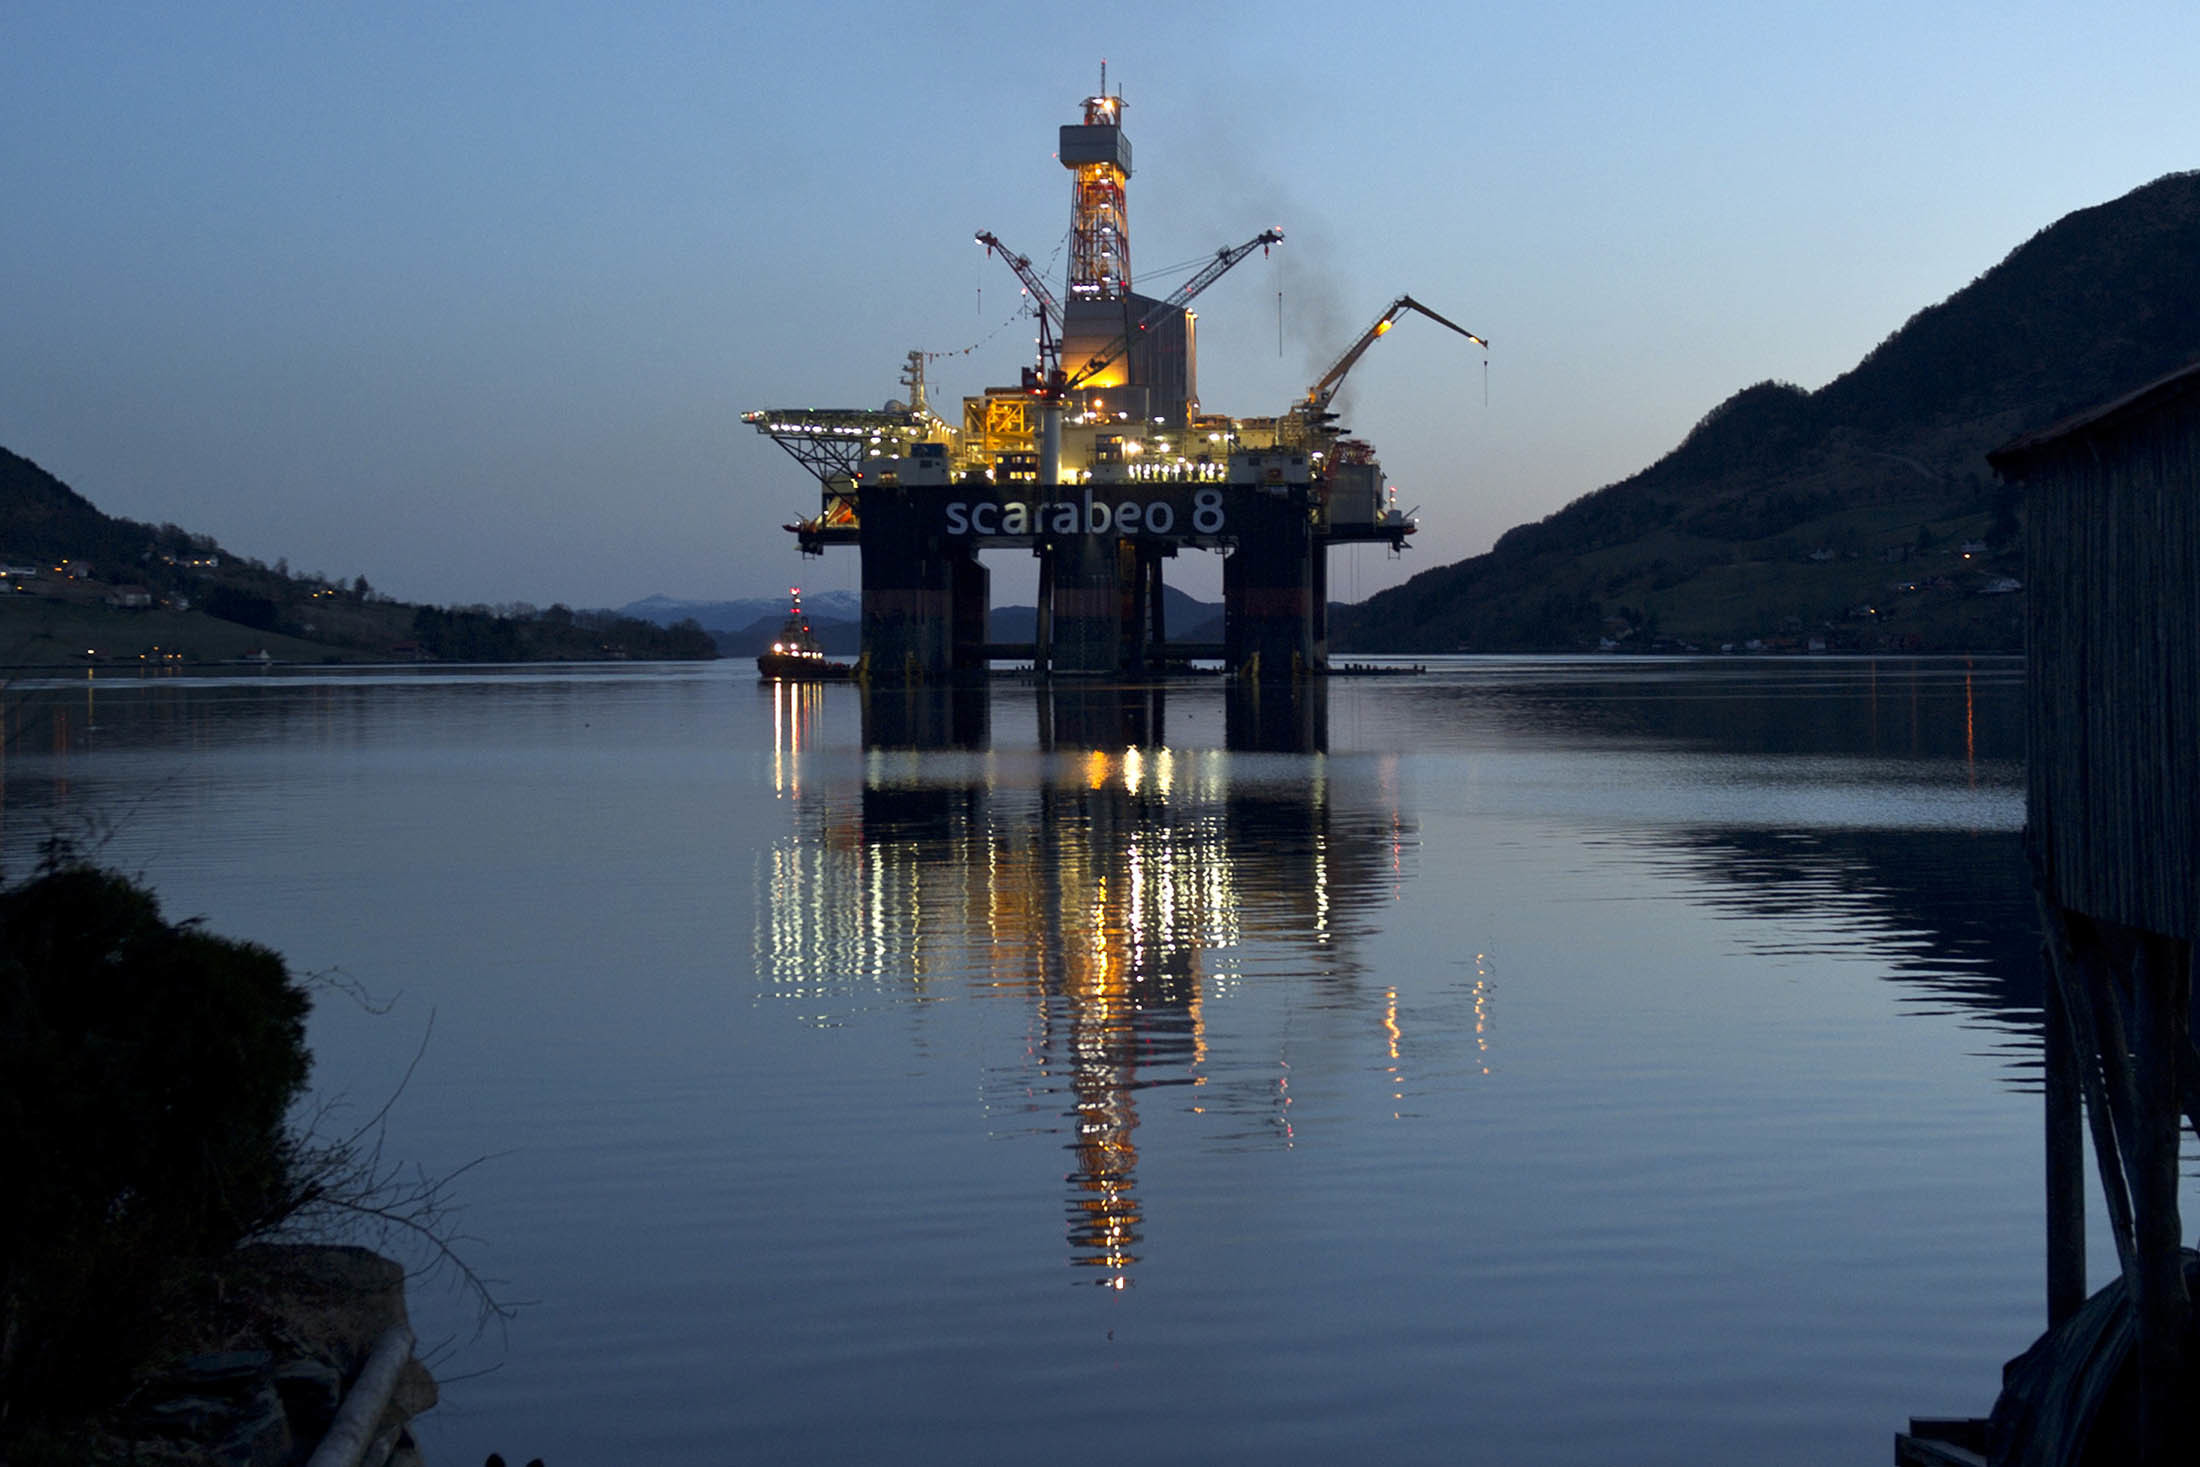 The Scarabeo 8 deepwater oil drilling rig stands illuminated at night after being re-fitted at the Westcon AS yard in Olensvag, Norway, on Tuesday, April 3, 2012.  Photographer: Kristian Helgesen/Bloomberg